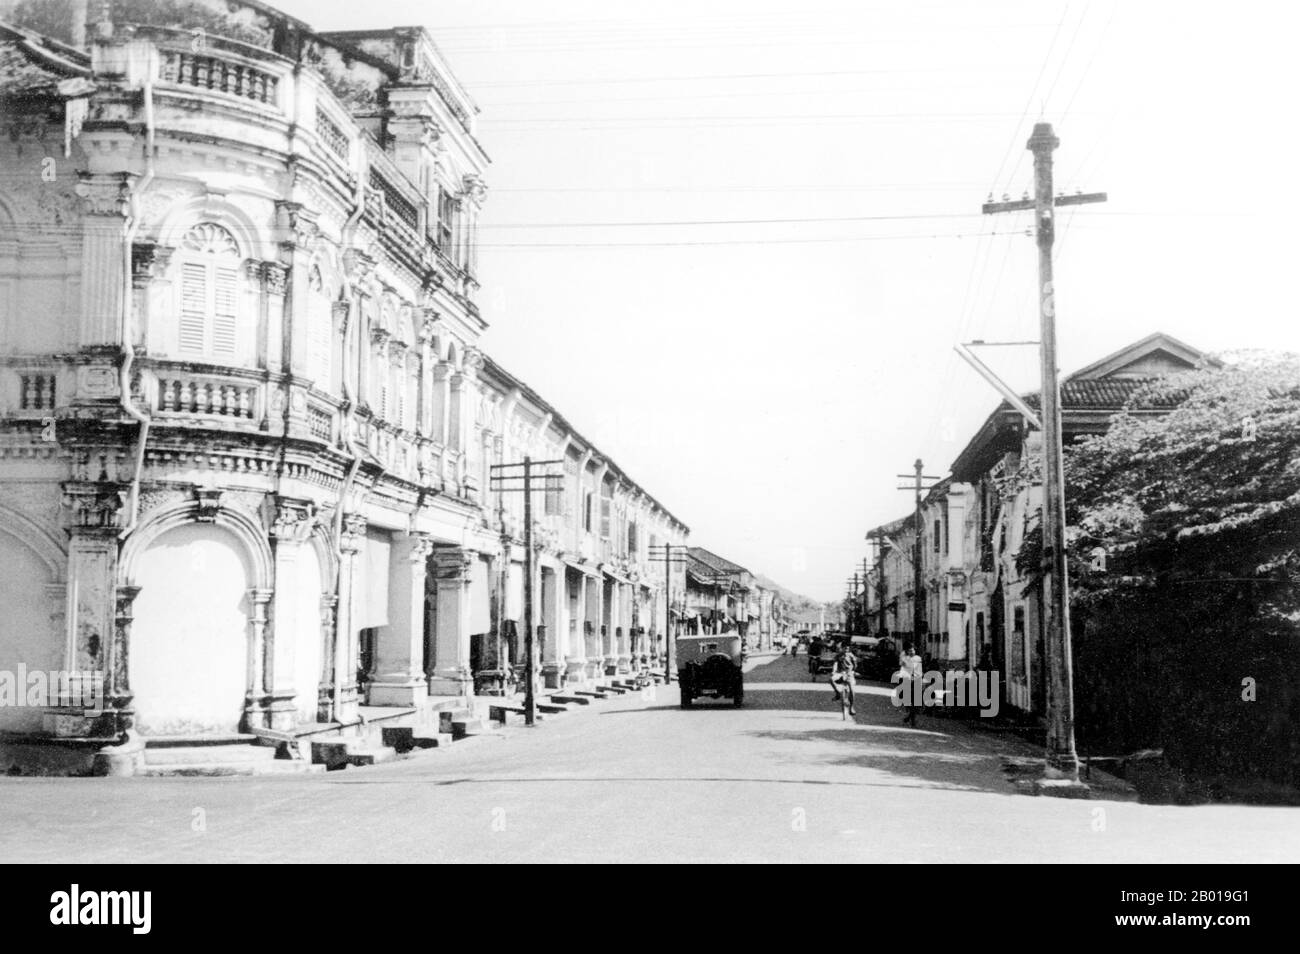 Thailand: Sino-Portuguese shophouses along Thanon Yaowarat (Yaowarat Road), Phuket, 1957.  Phuket, formerly known as Talang and, in Western sources, Junk Ceylon (a corruption of the Malay Tanjung Salang, i.e. 'Cape Salang'), is one of the southern provinces (changwat) of Thailand. Neighbouring provinces are (from north clockwise) Phang Nga and Krabi, but as Phuket is an island there are no land boundaries.  Phuket, which is approximately the size of Singapore, is Thailand’s largest island. The island is connected to mainland Thailand by two bridges. Stock Photo